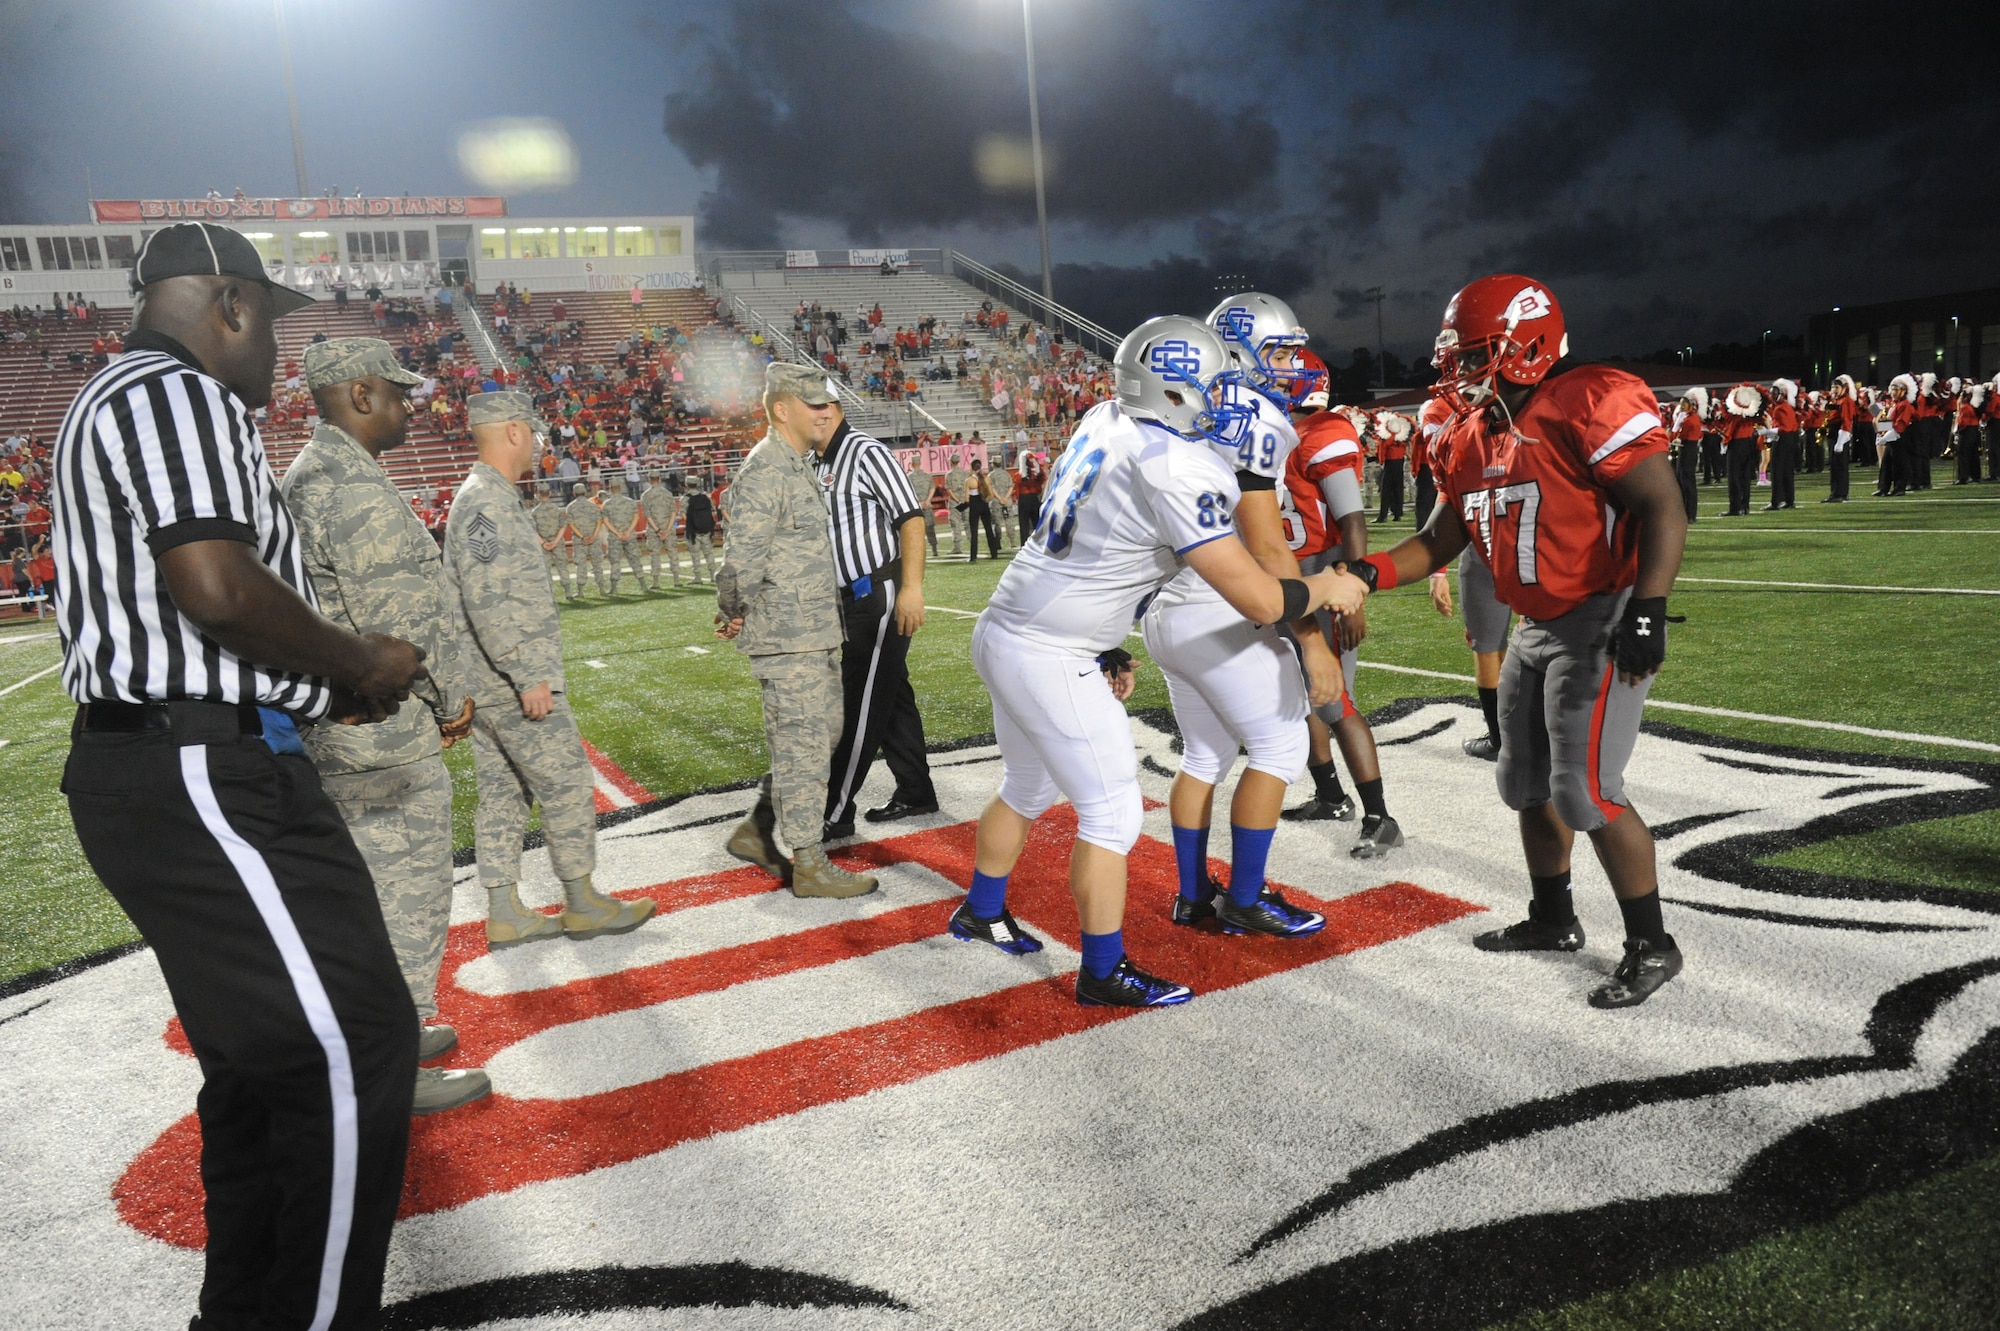 Maj. Gen. Mark Brown, 2nd Air Force commander; Chief Master Sgt. David Staton, 2nd AF command chief, and Brig. Gen. Patrick Higby, 81st Training Wing commander, meet with the football team captains following the coin toss by Staton at the Biloxi High School football game against Ocean Springs High School Oct. 10, 2014, at the Biloxi football stadium.  Staton tossed the coin to determine which team would receive the ball first. Ocean Springs defeated Biloxi 35-21.  (U.S. Air Force photo by Kemberly Groue)